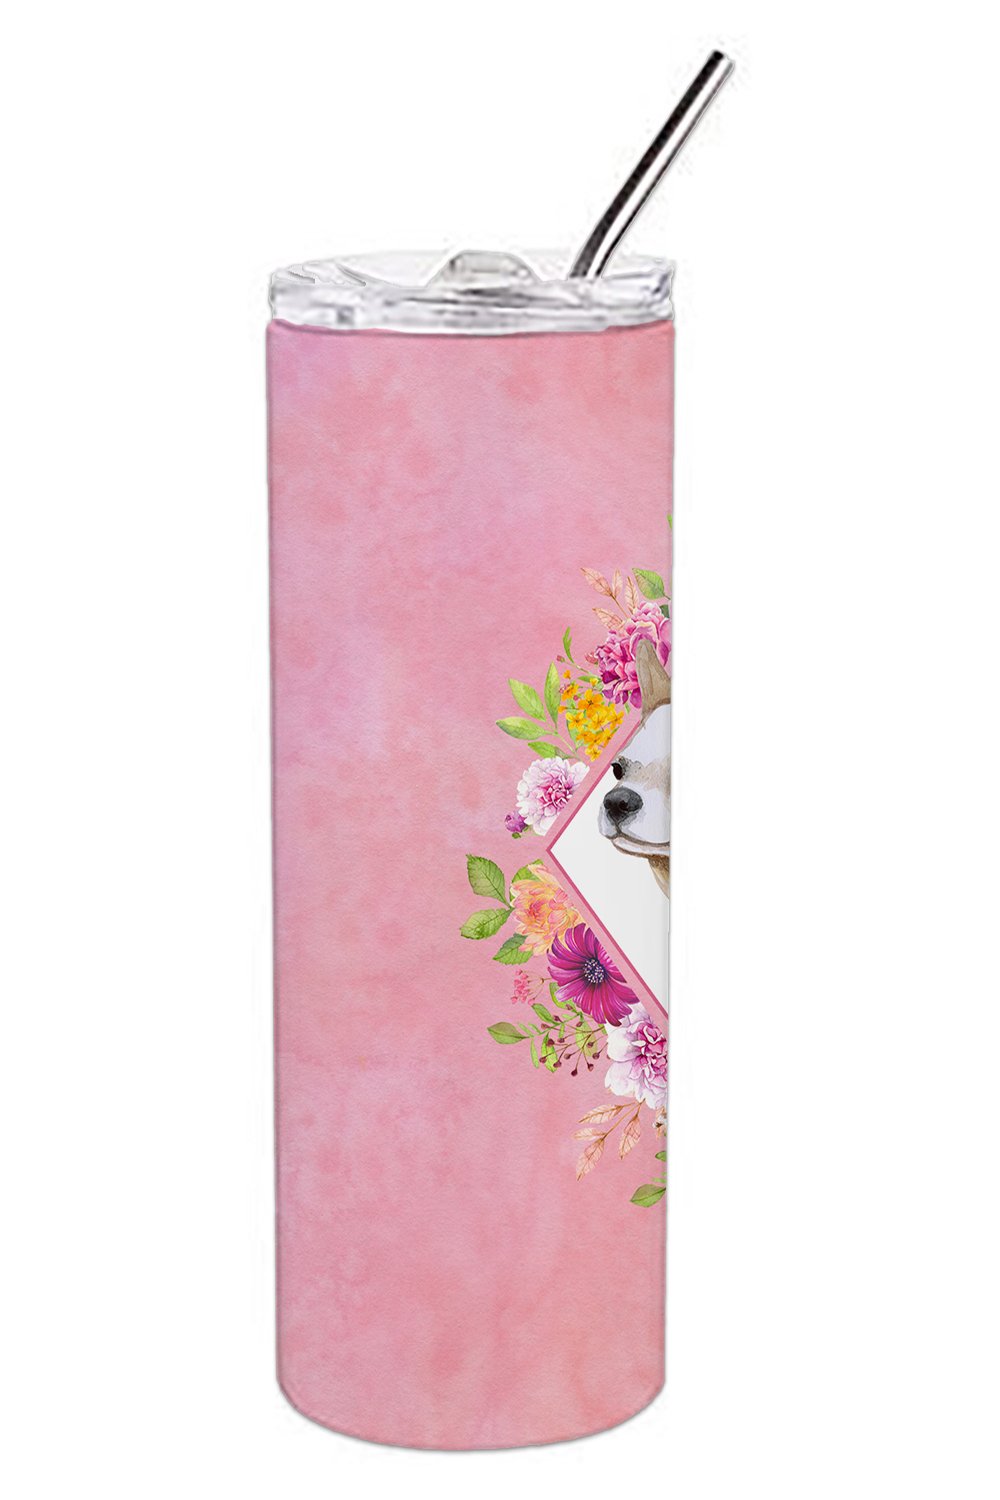 Chihuahua #2 Pink Flowers Double Walled Stainless Steel 20 oz Skinny Tumbler CK4129TBL20 by Caroline's Treasures